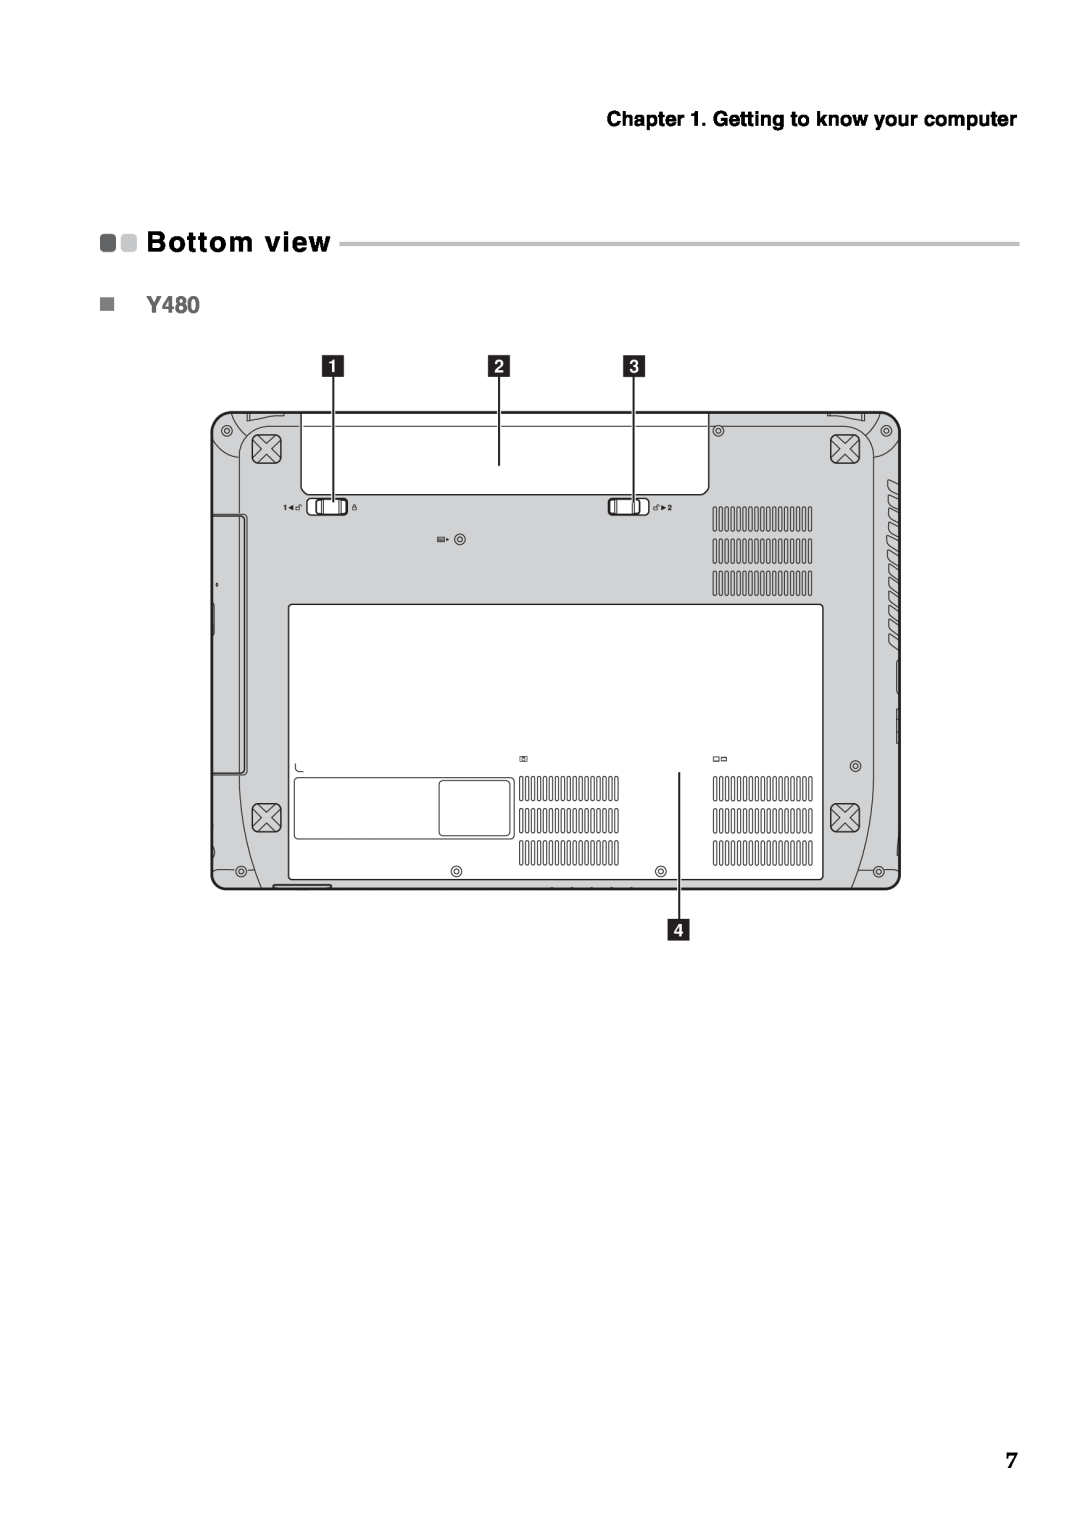 Lenovo Y580 manual „ Y480, Getting to know your computer, a b c d, Bottom view 